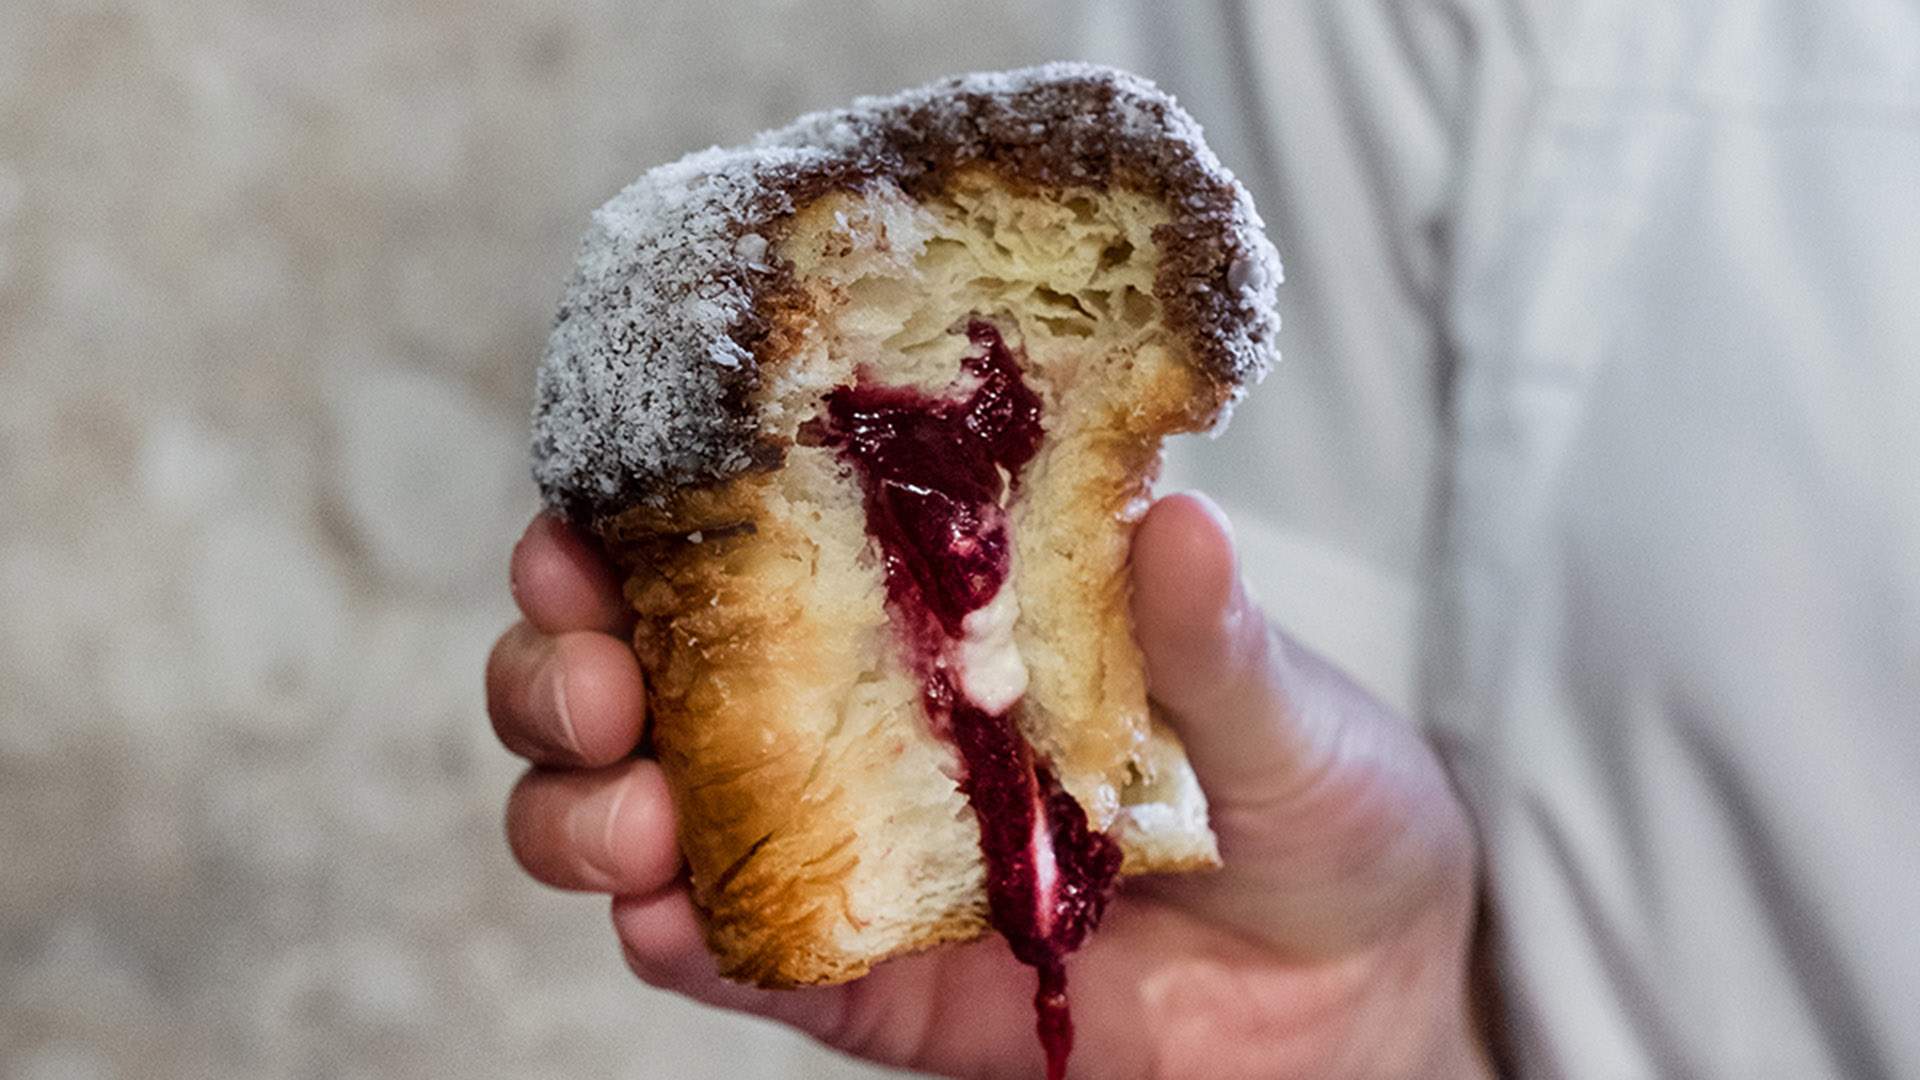 Lune Croissanterie's Lamington Cruffin Is the Next OTT Dessert You Need to Try